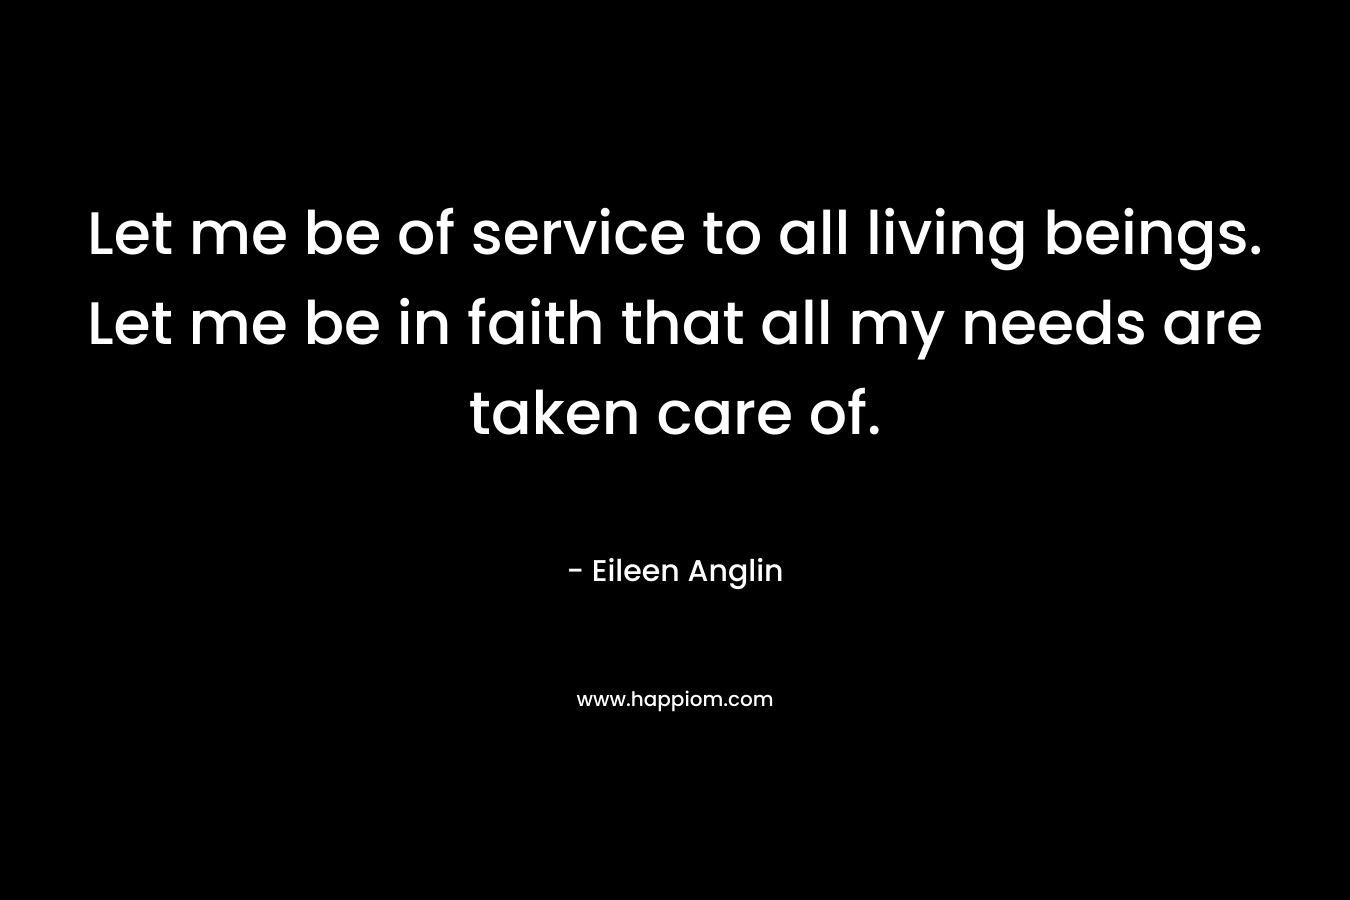 Let me be of service to all living beings. Let me be in faith that all my needs are taken care of.